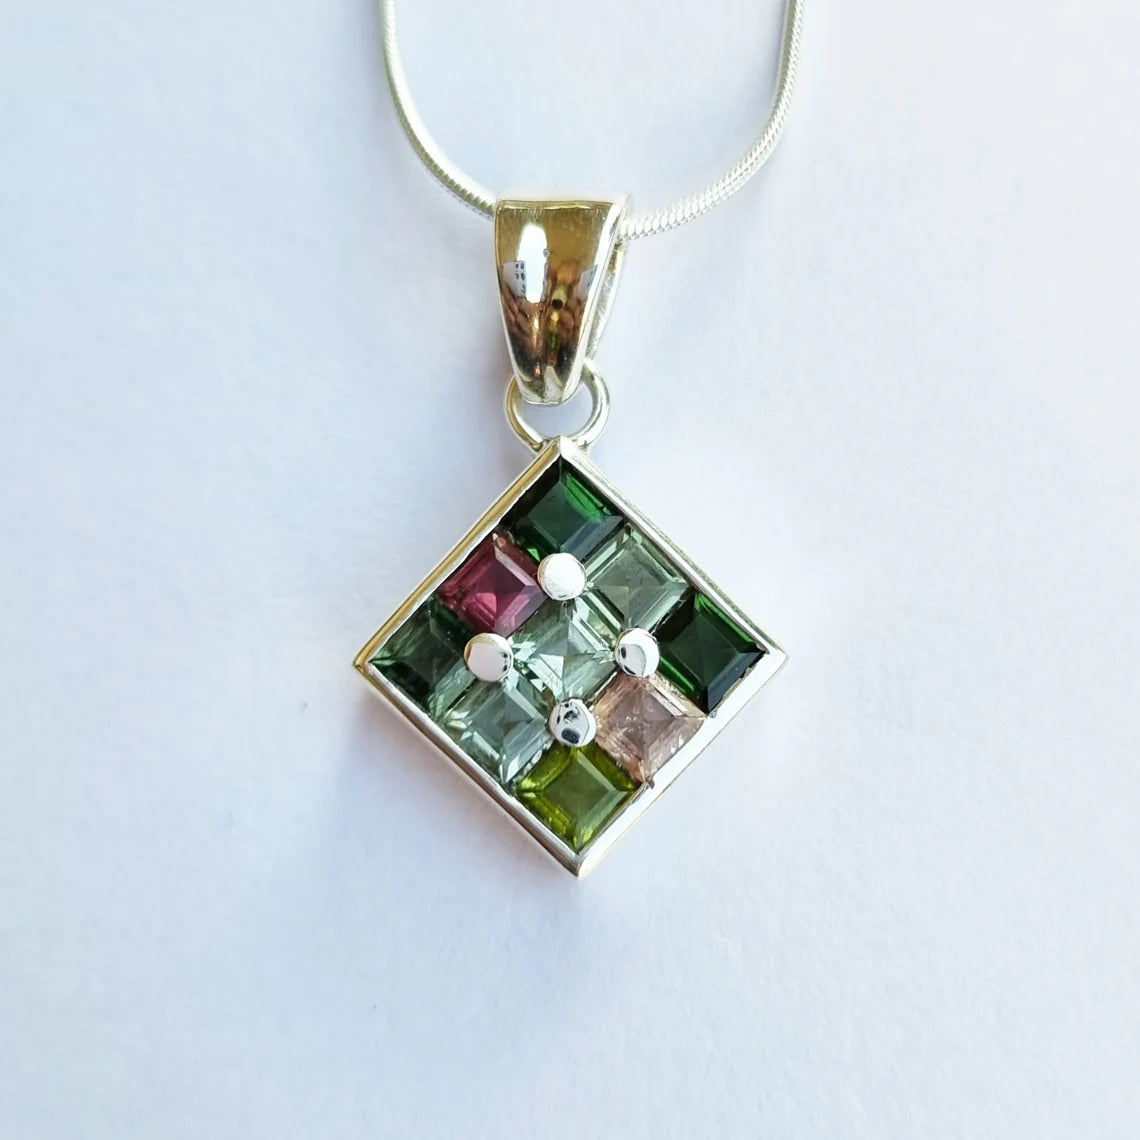 Natural Green Tourmaline Pendant, 925 Sterling Silver Tourmaline Gemstone pendant, Multi Tourmaline Silver Necklace